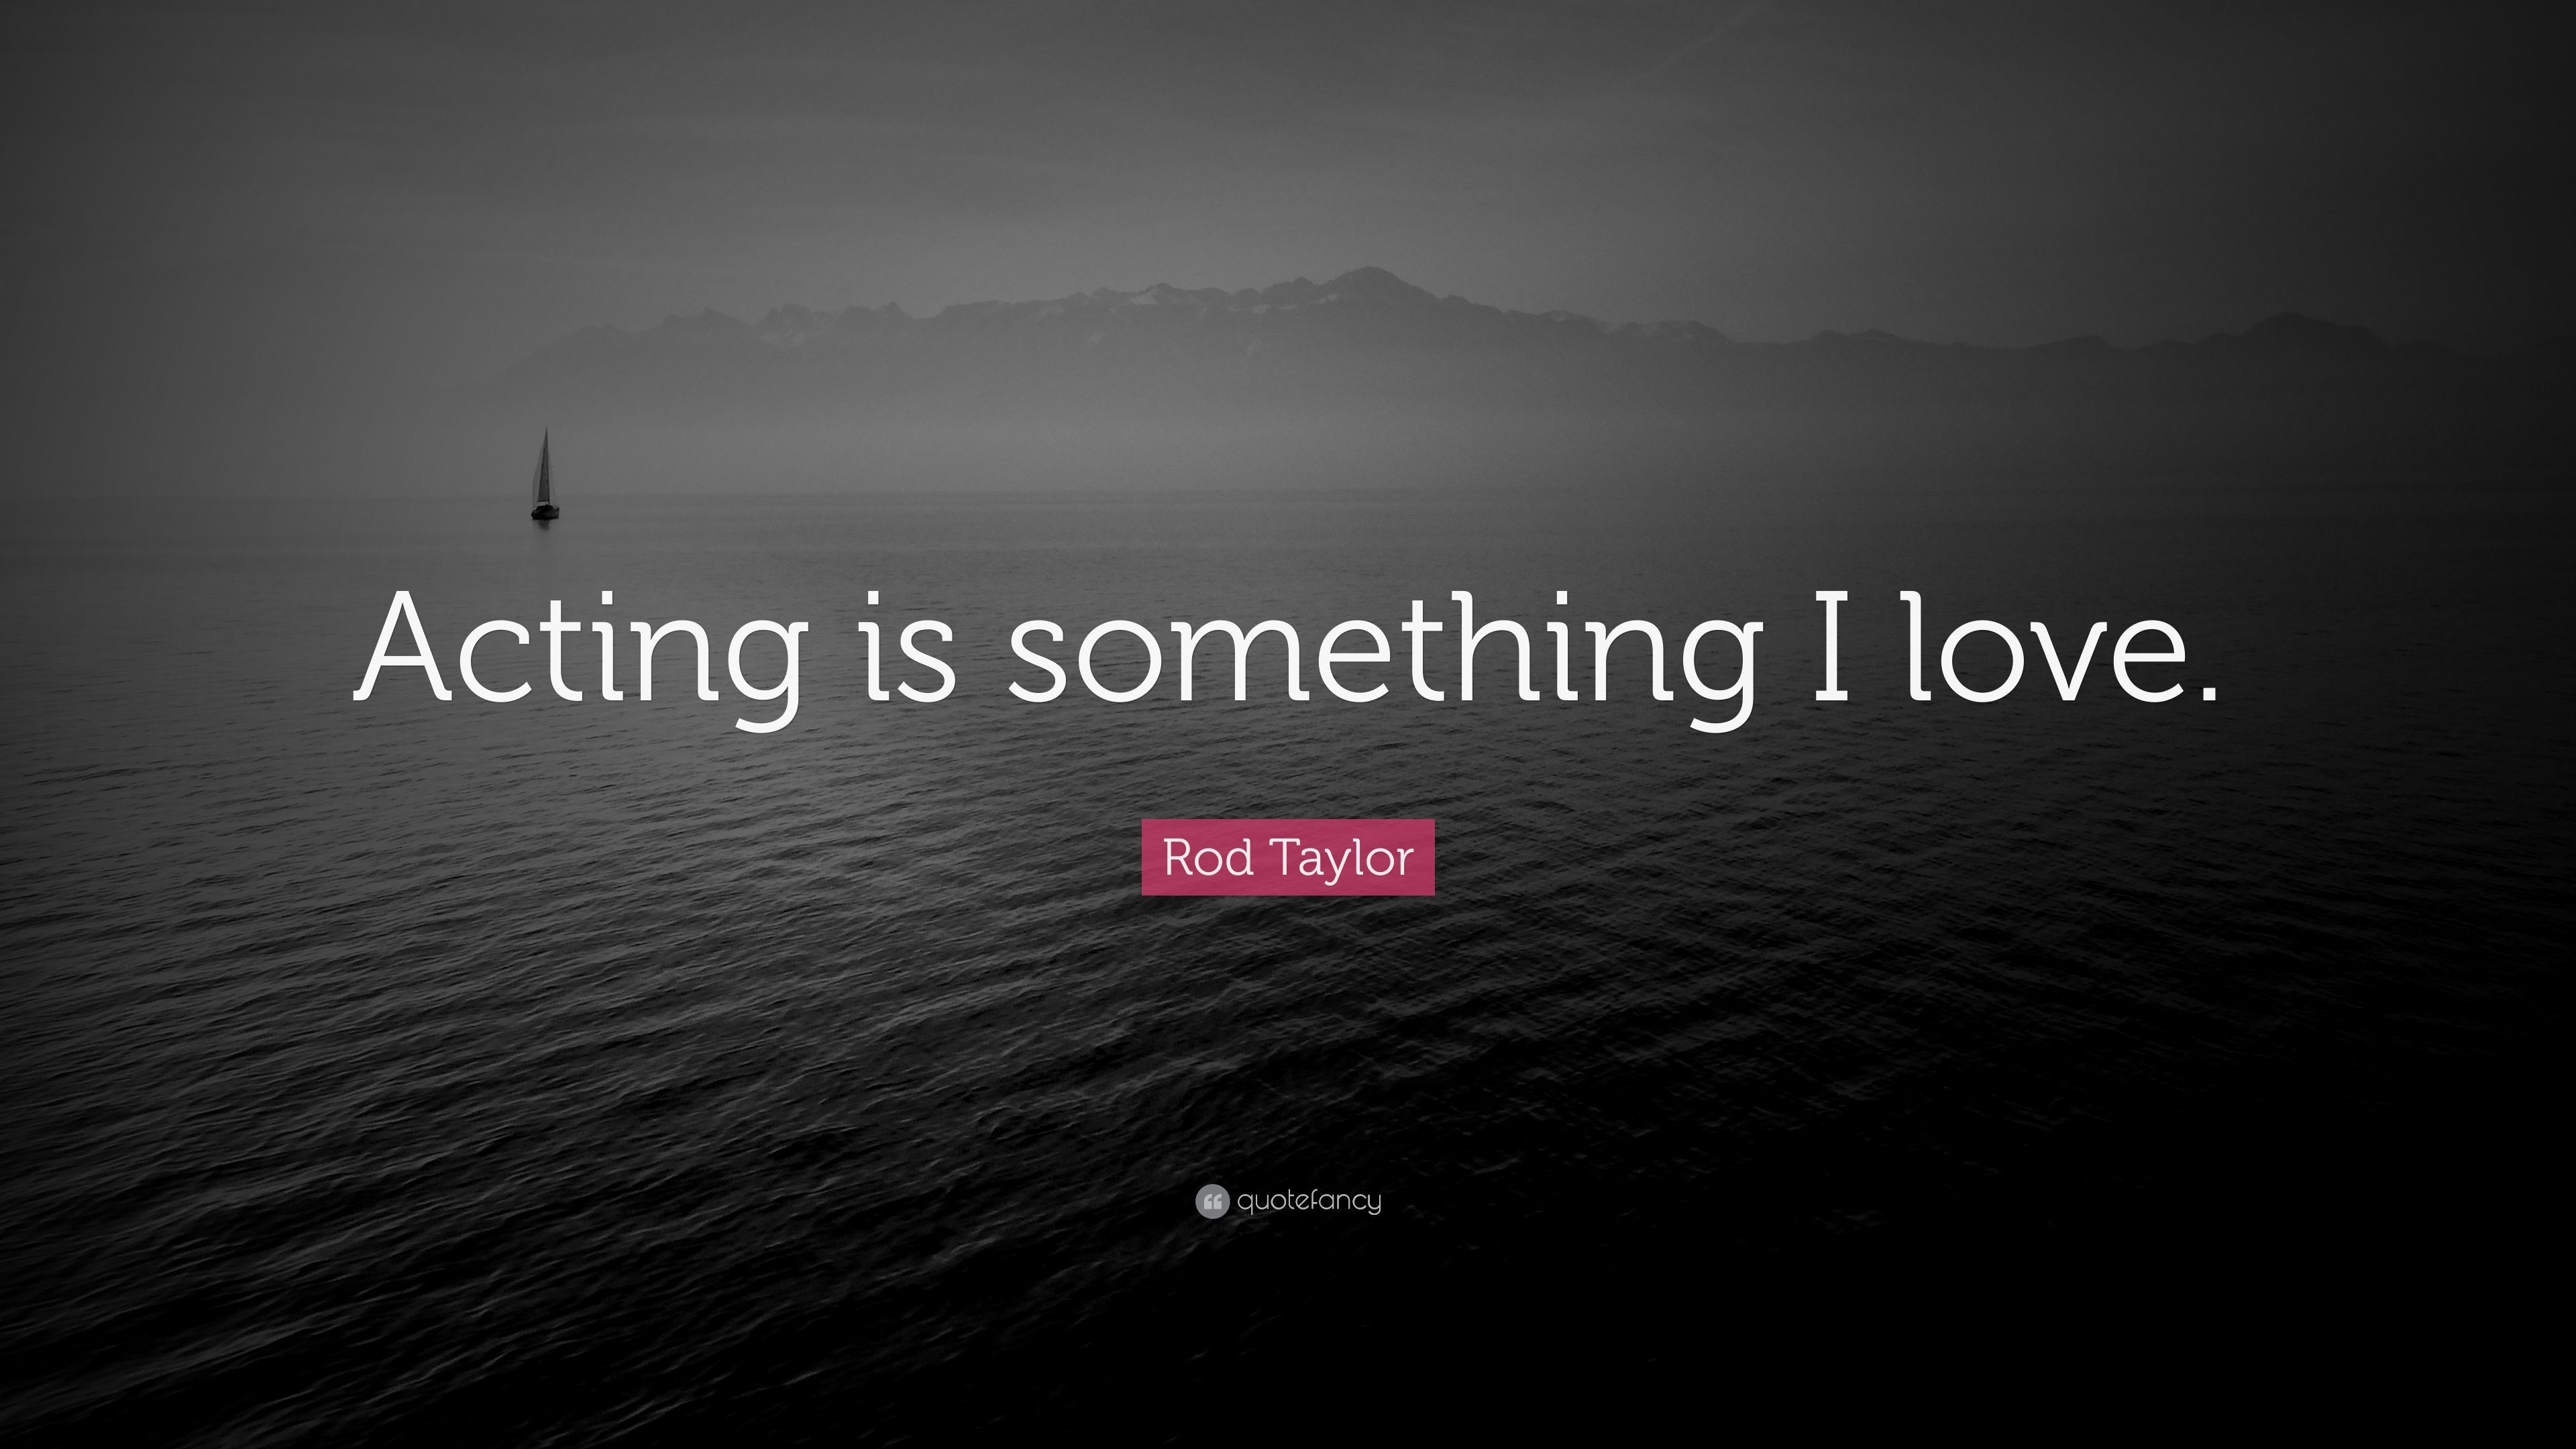 Rod Taylor Quote: "Acting is something I love. 